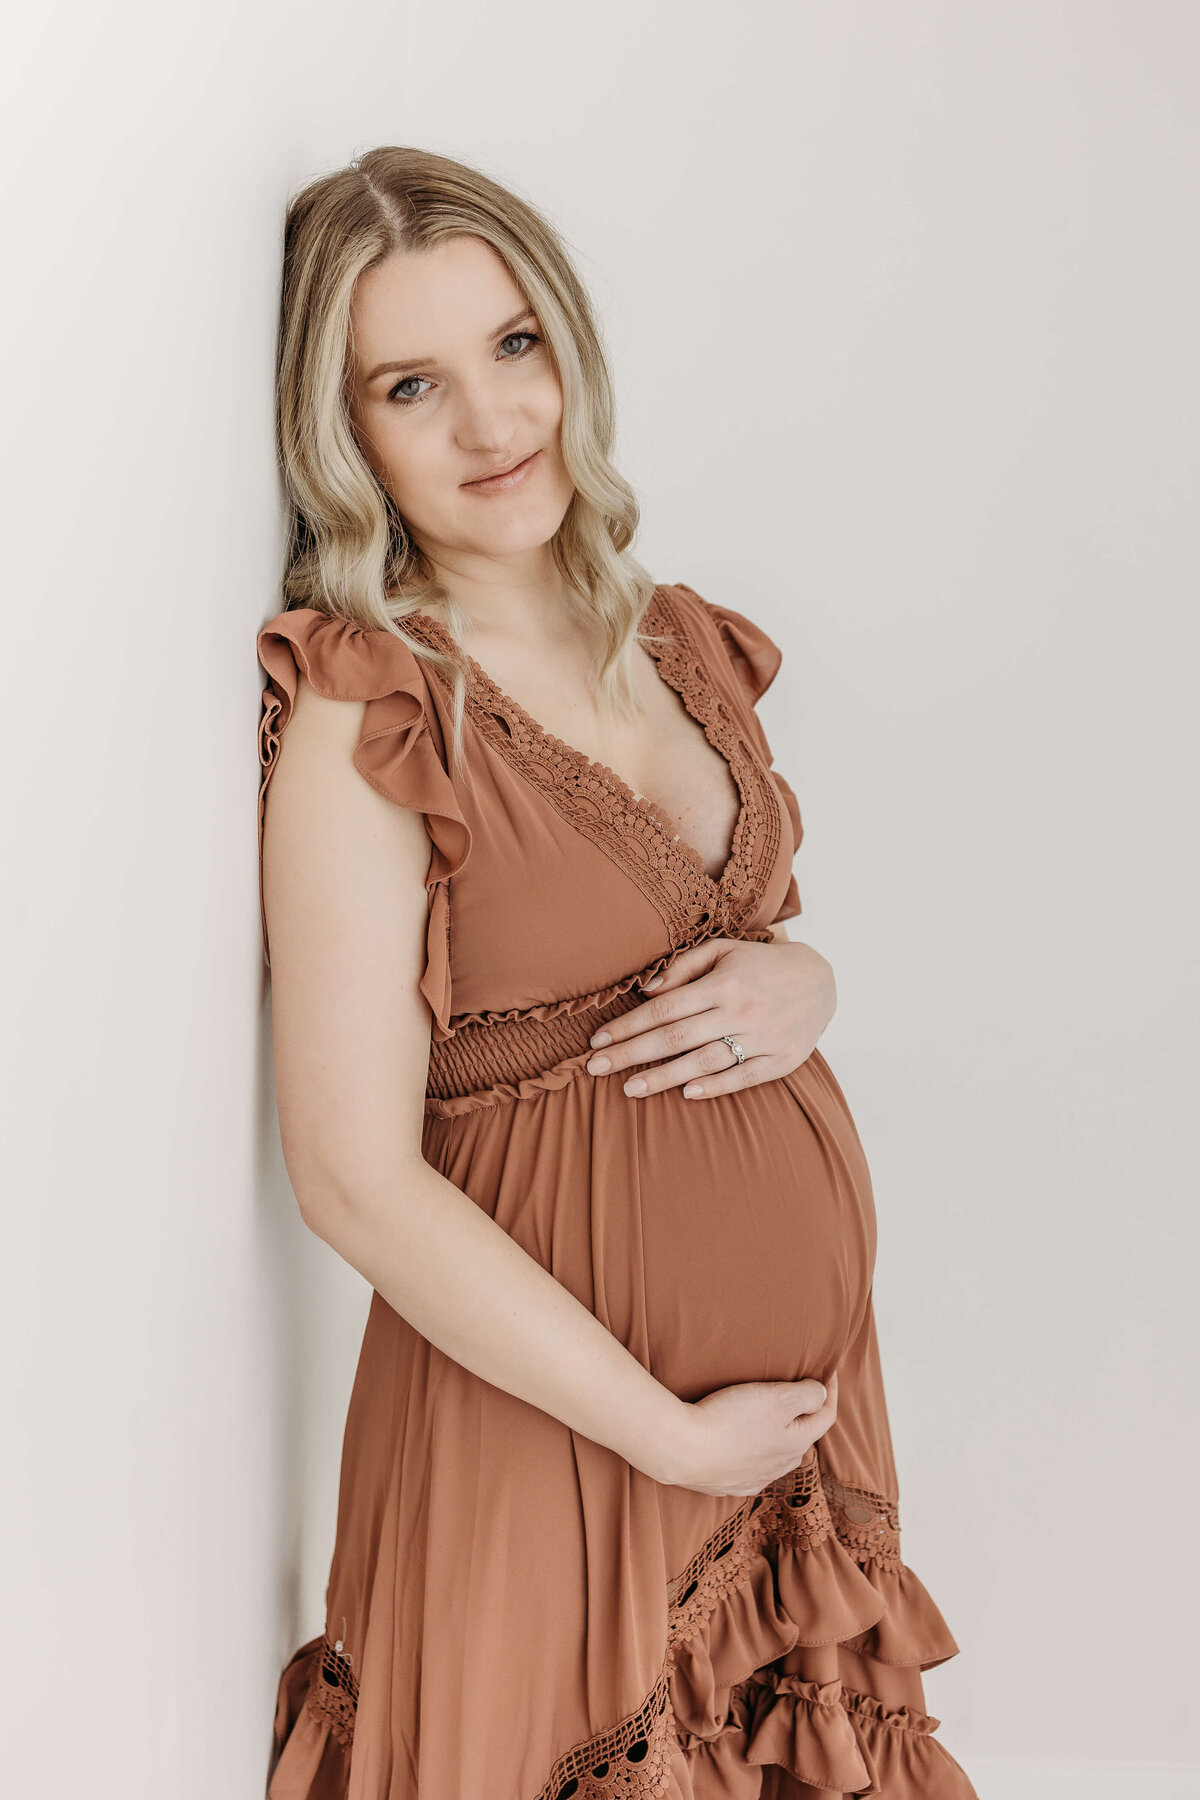 Smiling blonde pregnant mom leaning up against a wall looking at camera